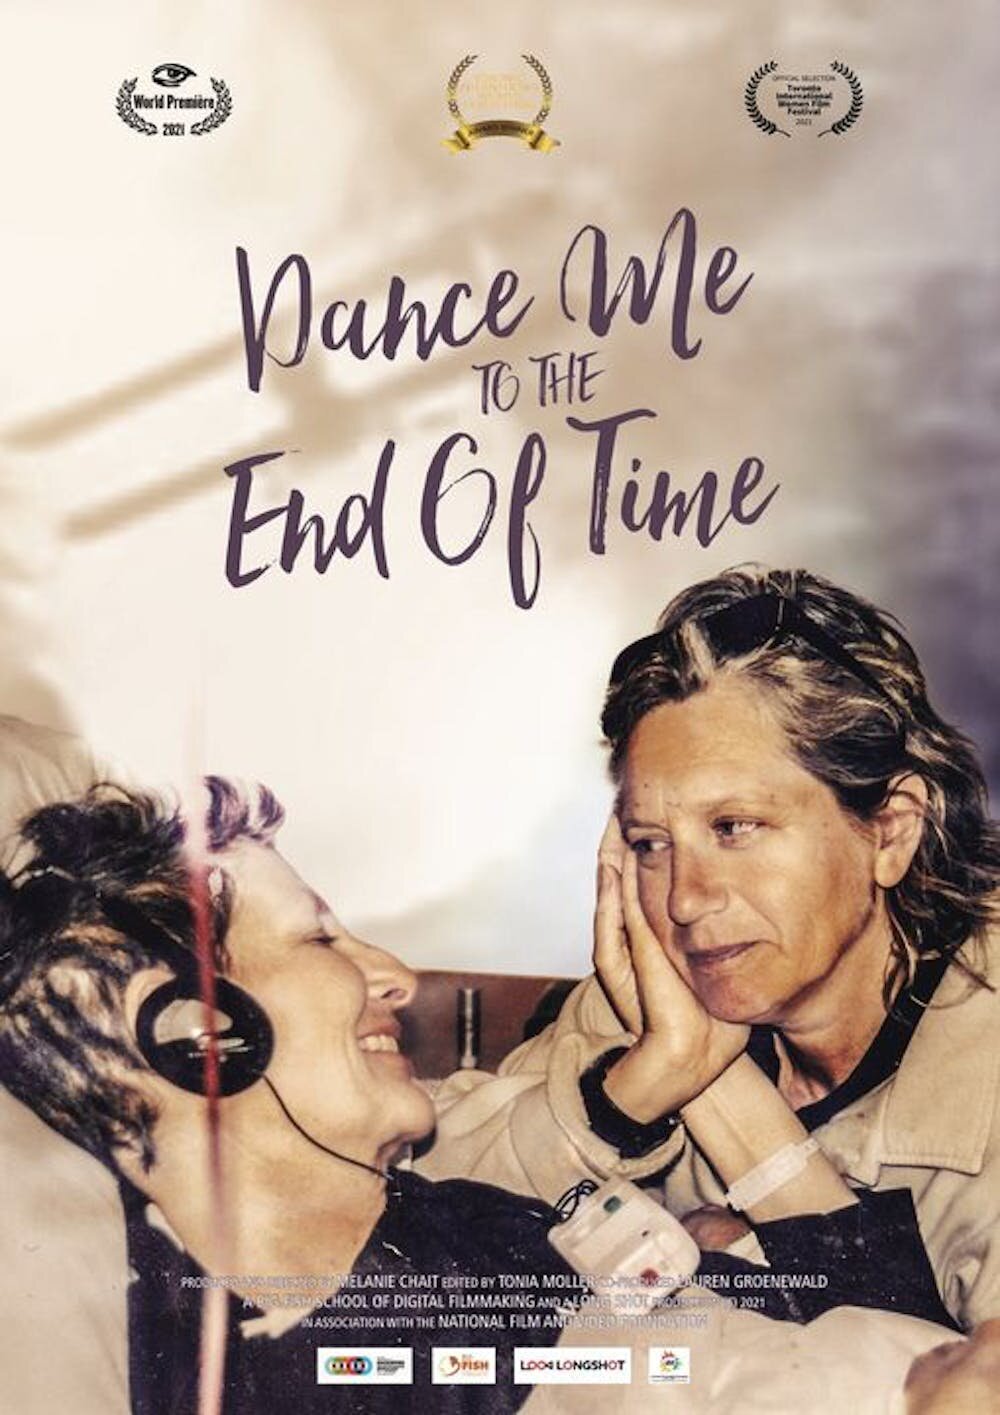 Image: Dance Me to The End of Time film